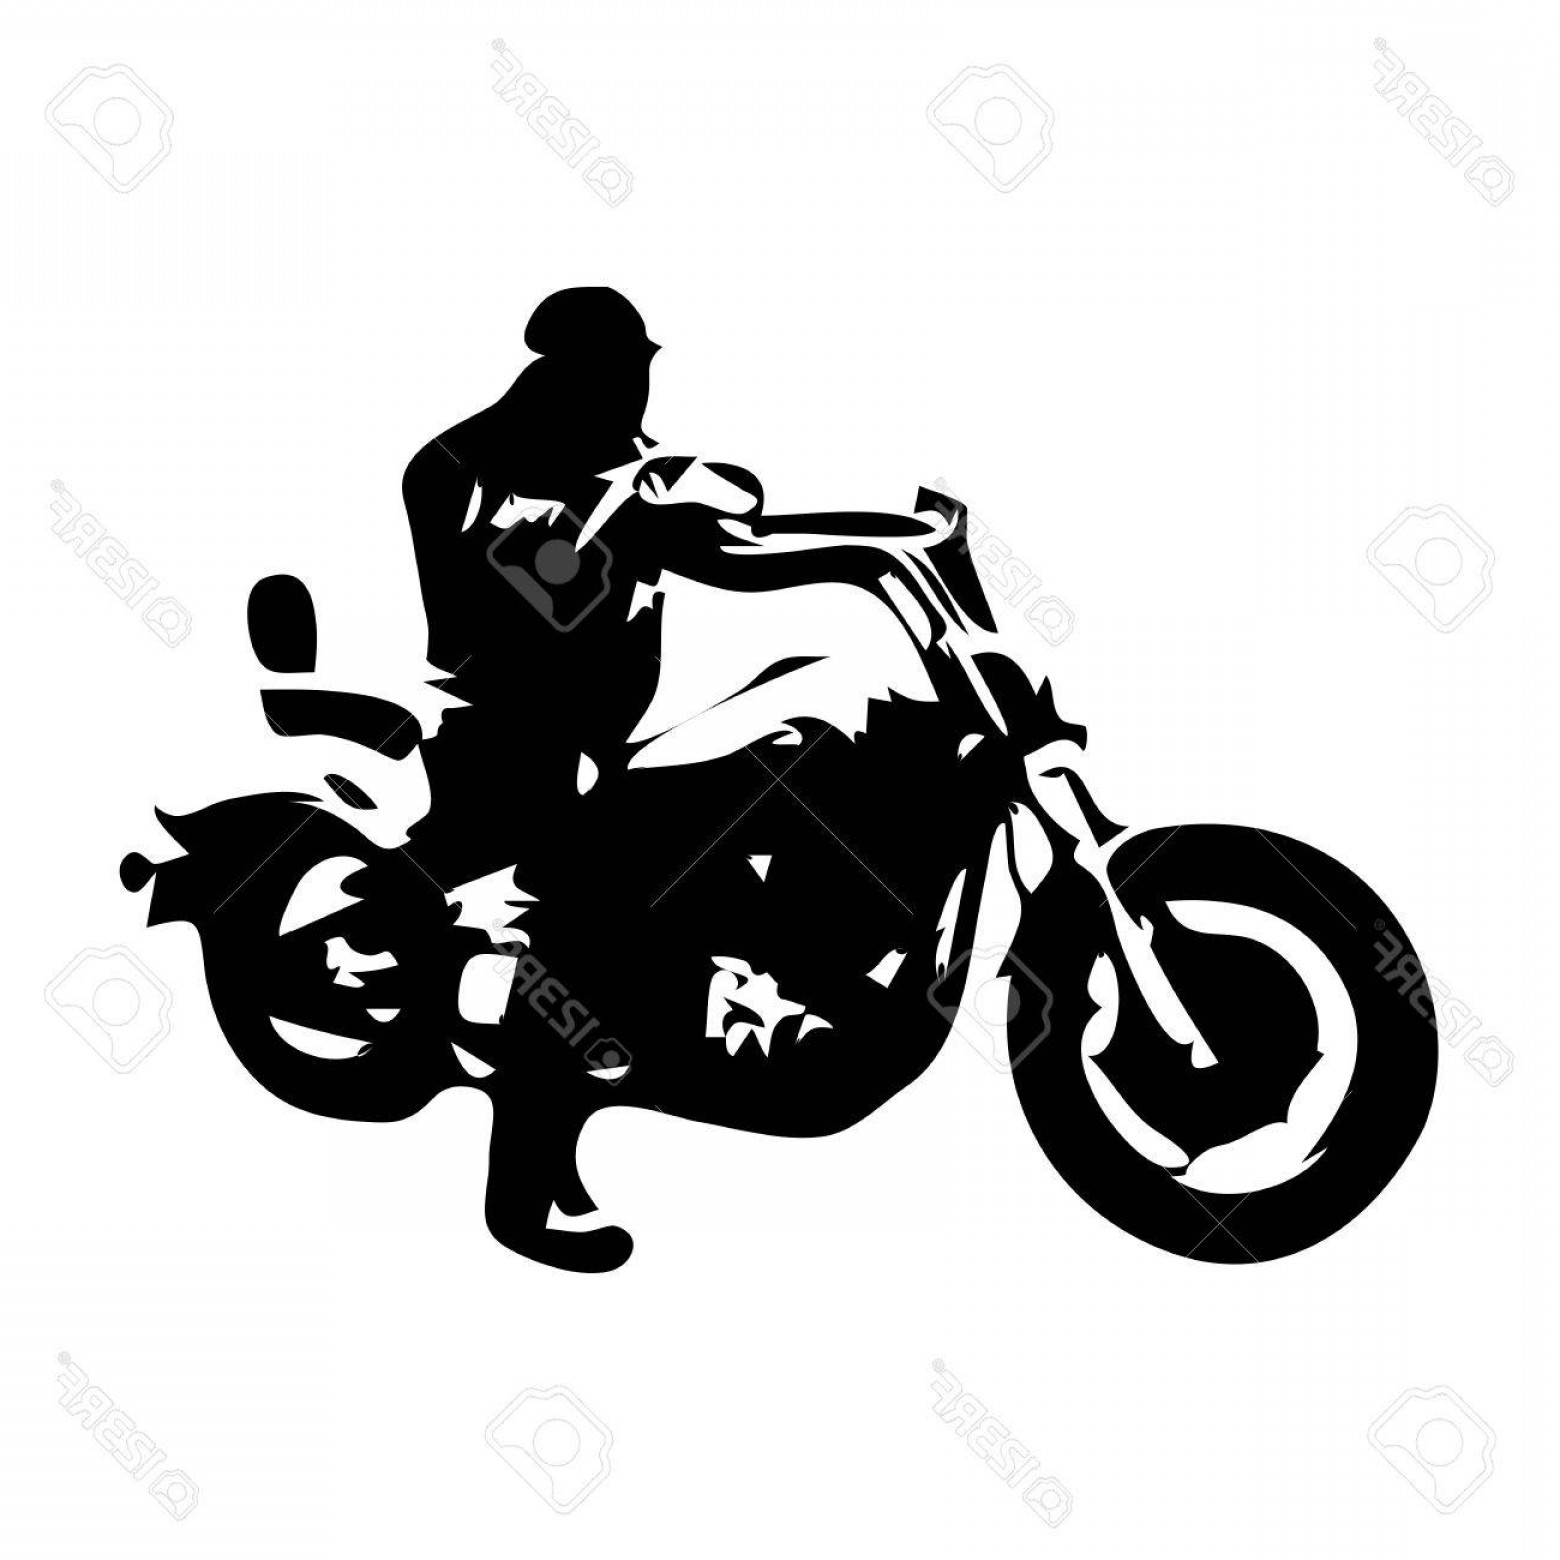 Download Motorcycle Rider Silhouette Vector at Vectorified.com ...